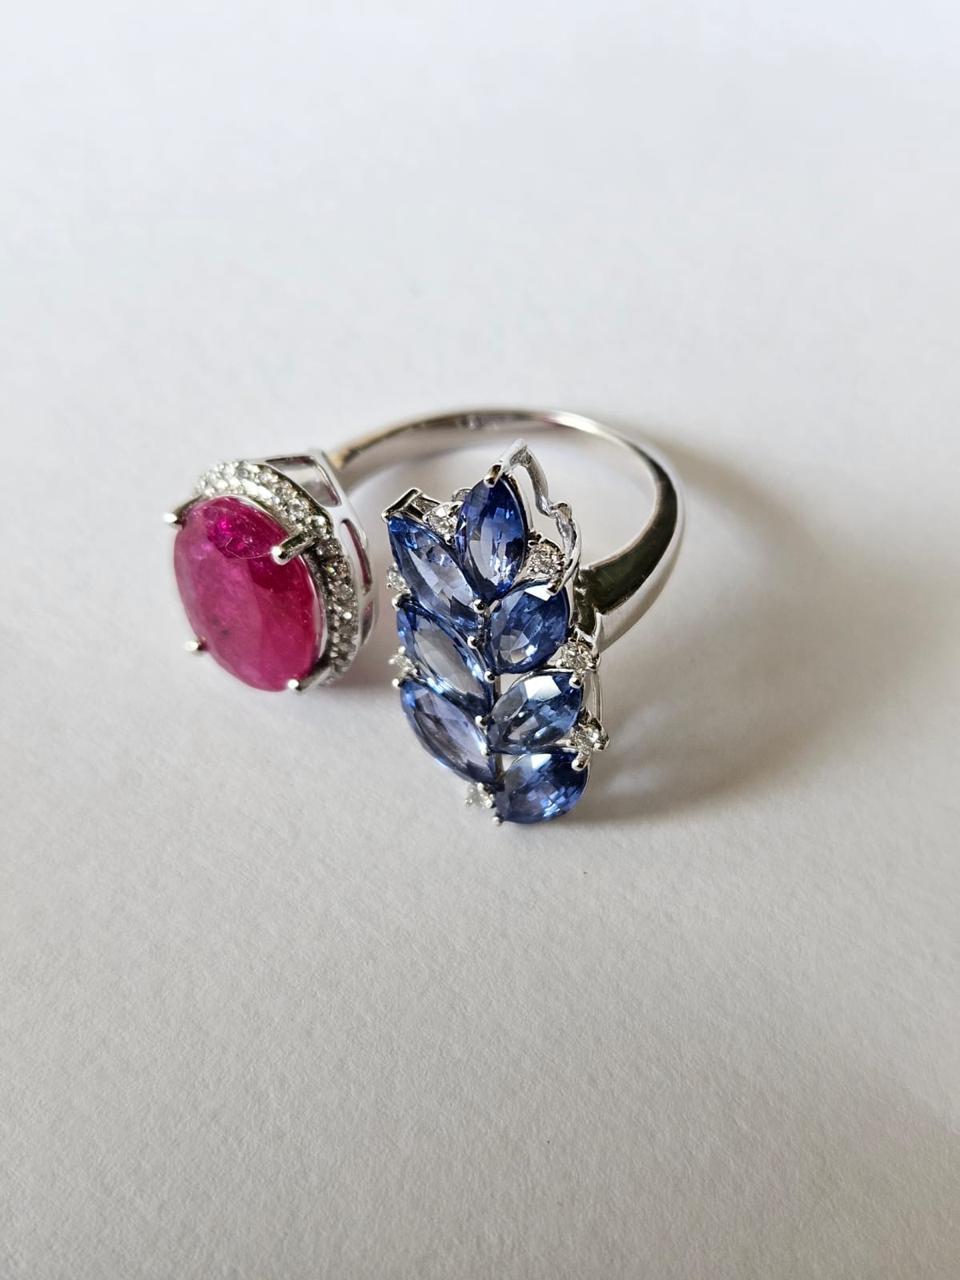 Oval Cut 3.55 carats, natural Mozambique Ruby, Blue Sapphires & Diamonds Engagement Ring For Sale